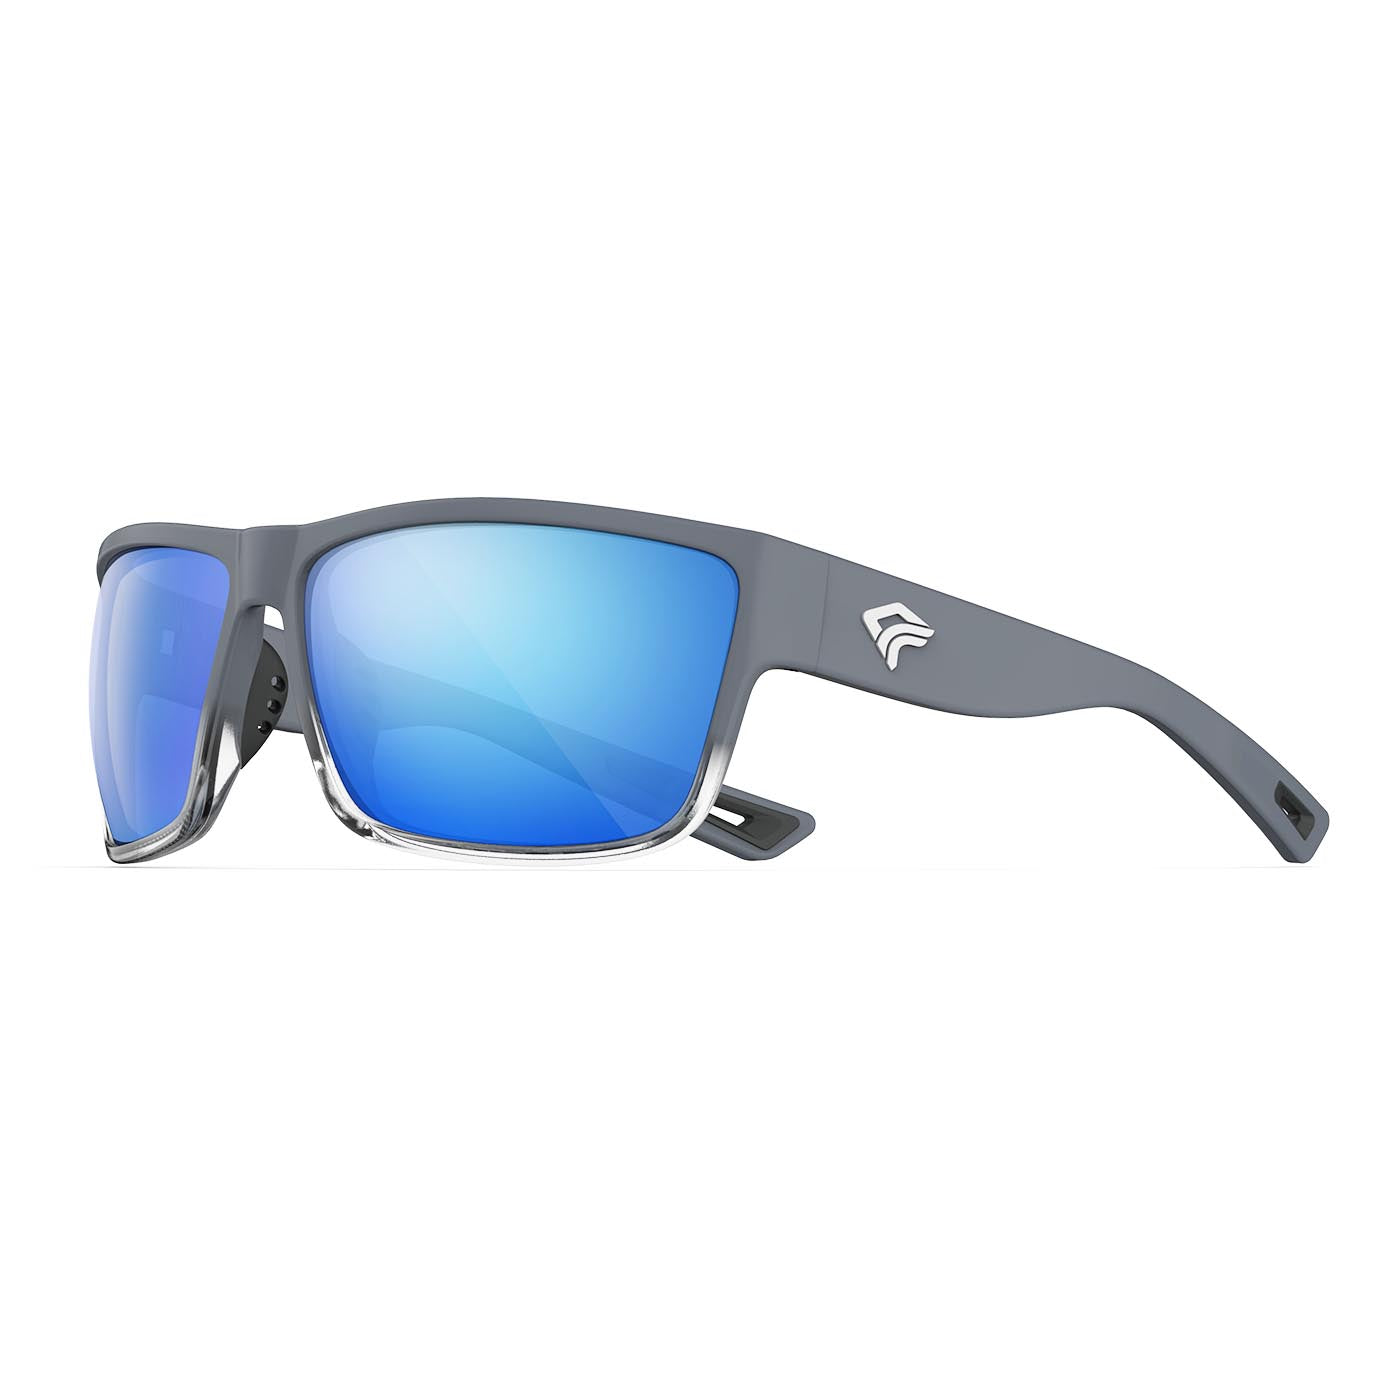 Torege 'Pure' Polarized Sports Sunglasses with Lifetime Warranty - Flexible Frame for Men and Women - Ideal for Cycling, Running, Golf, and Fishing